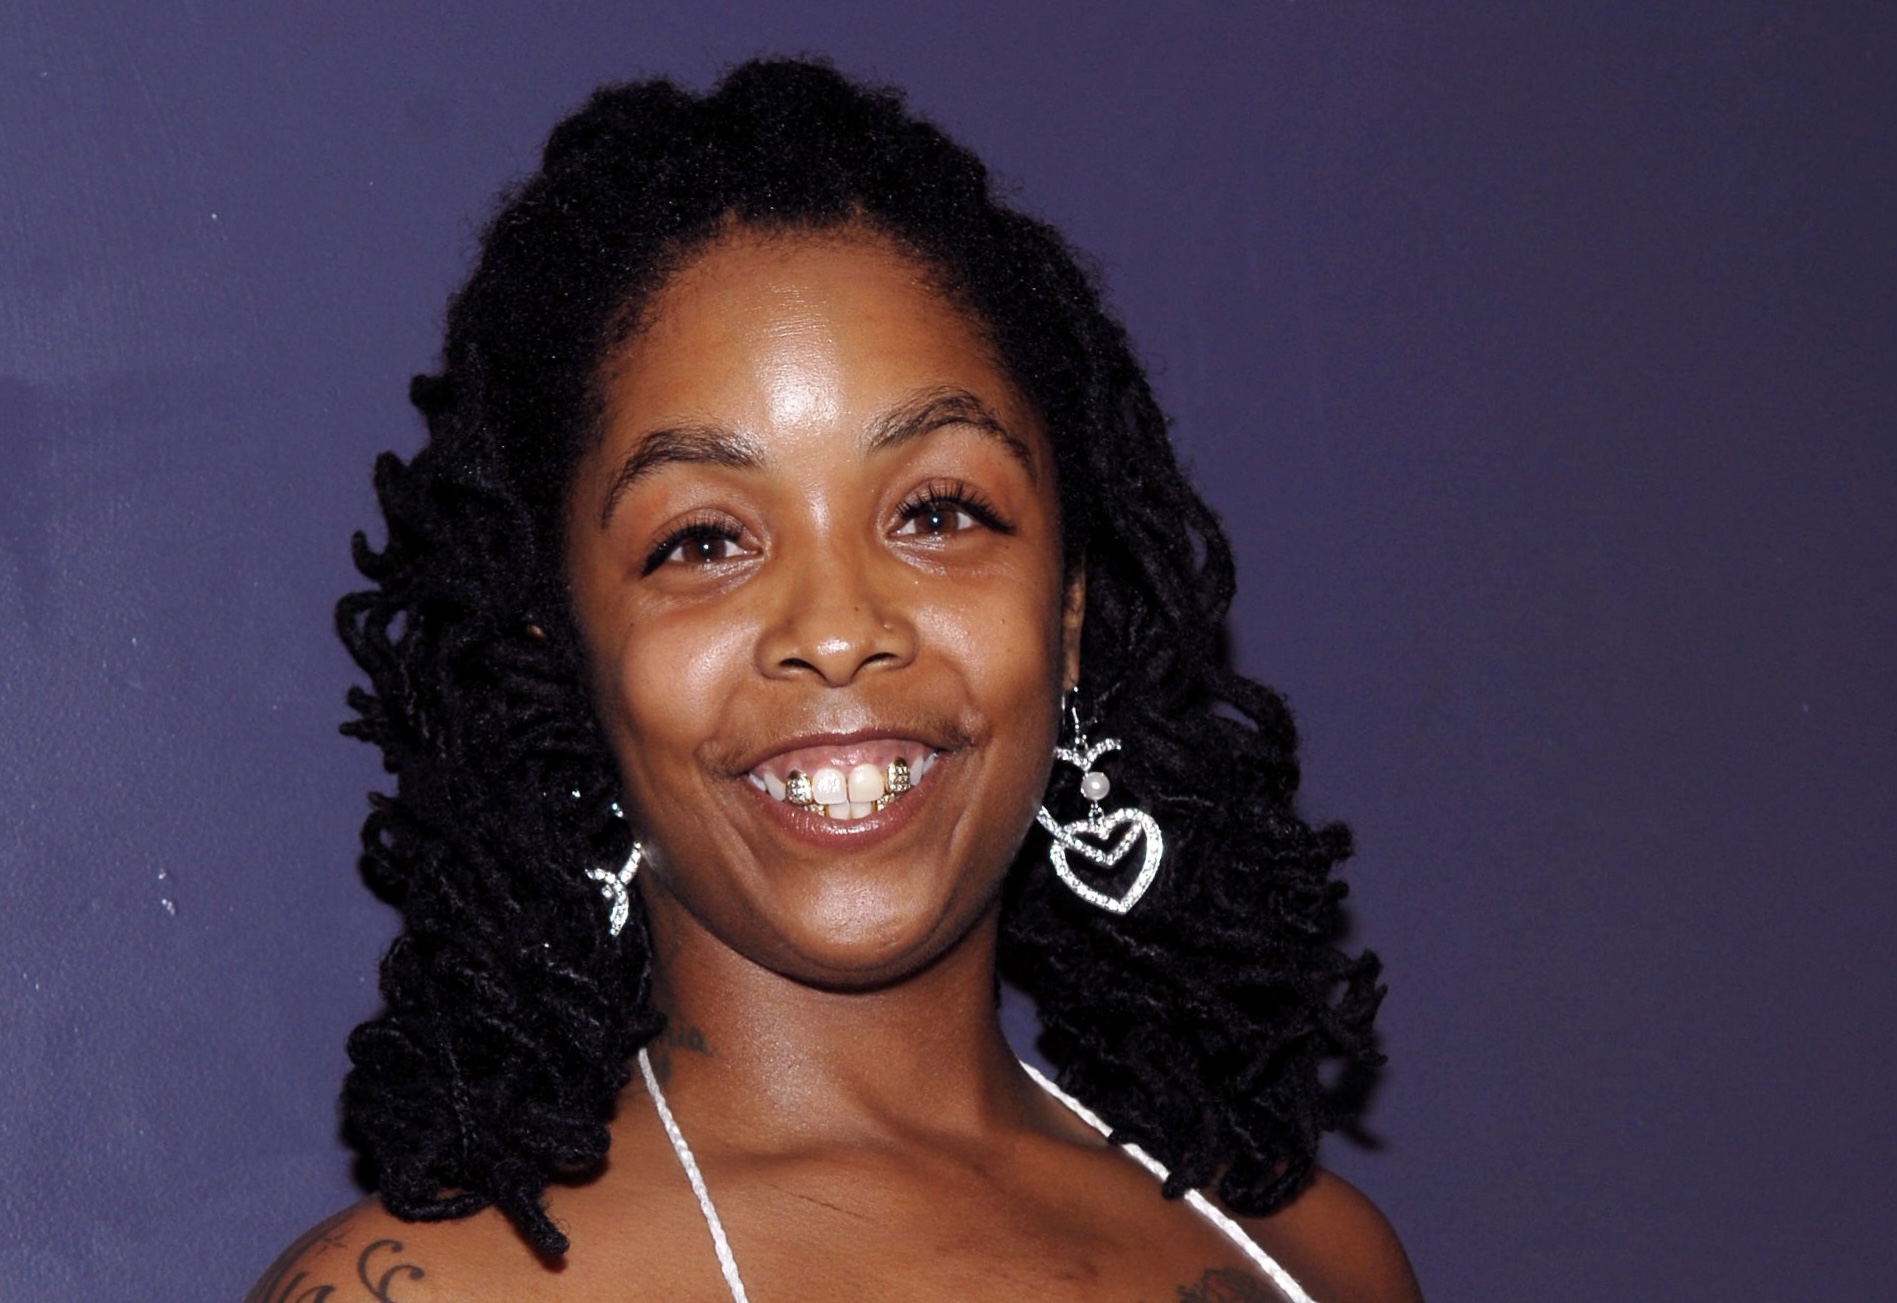 Khia Criticized After Charging Fan $10 For Selfie At Gas Station